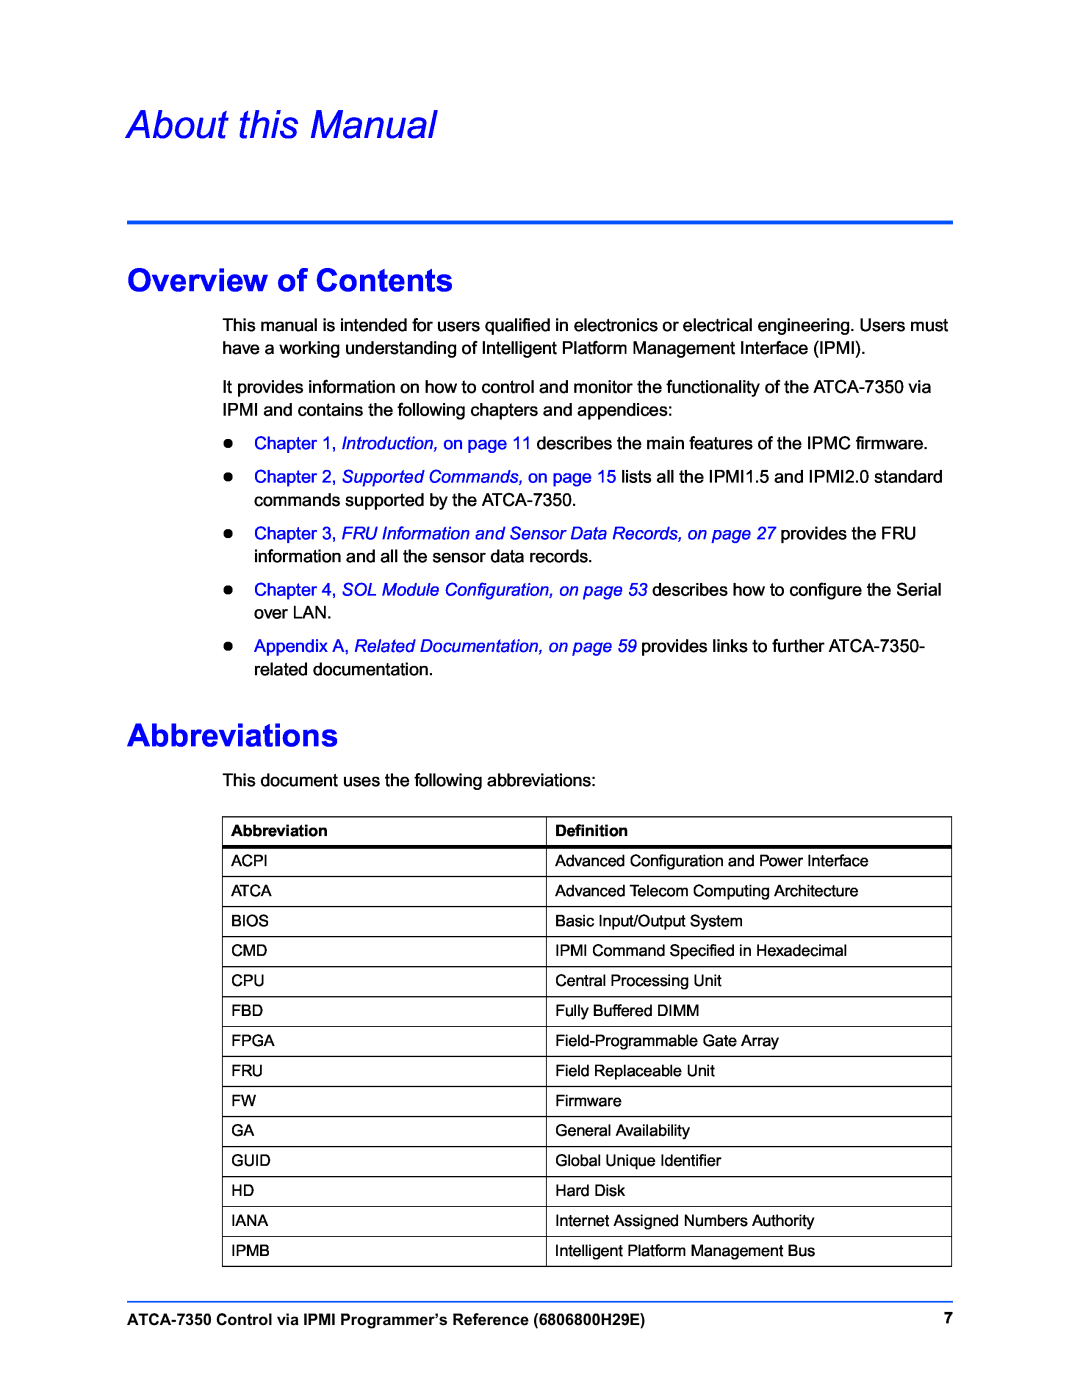 Emerson ATCA-7350 manual About this Manual, Overview of Contents, Abbreviations 